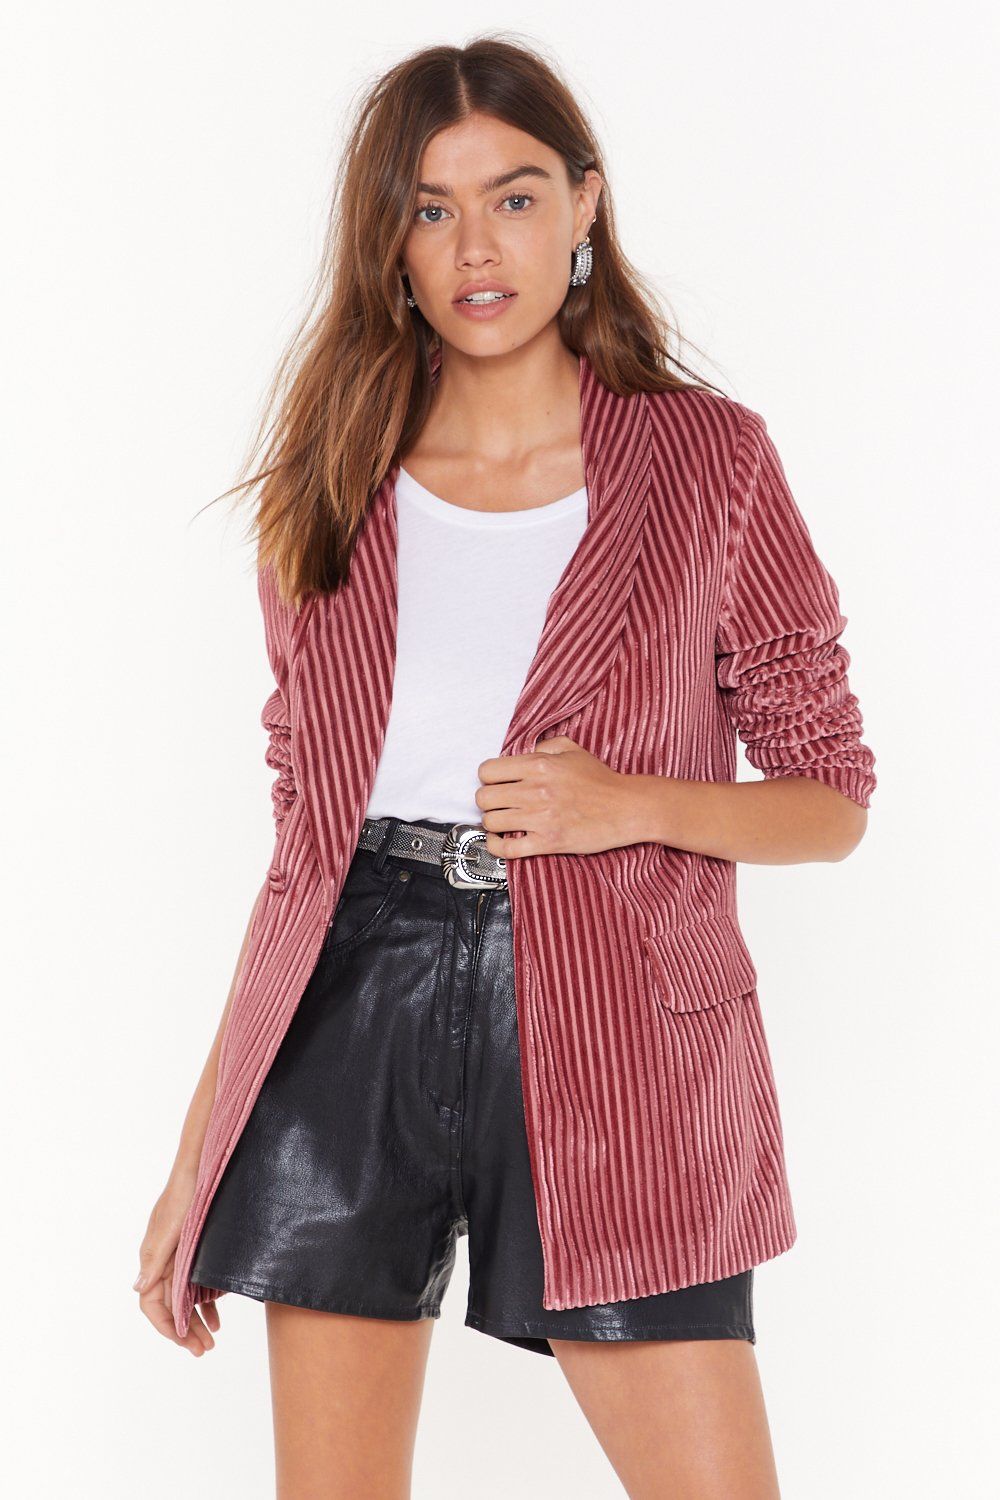 Chic Blazer Outfits Ideas for Women